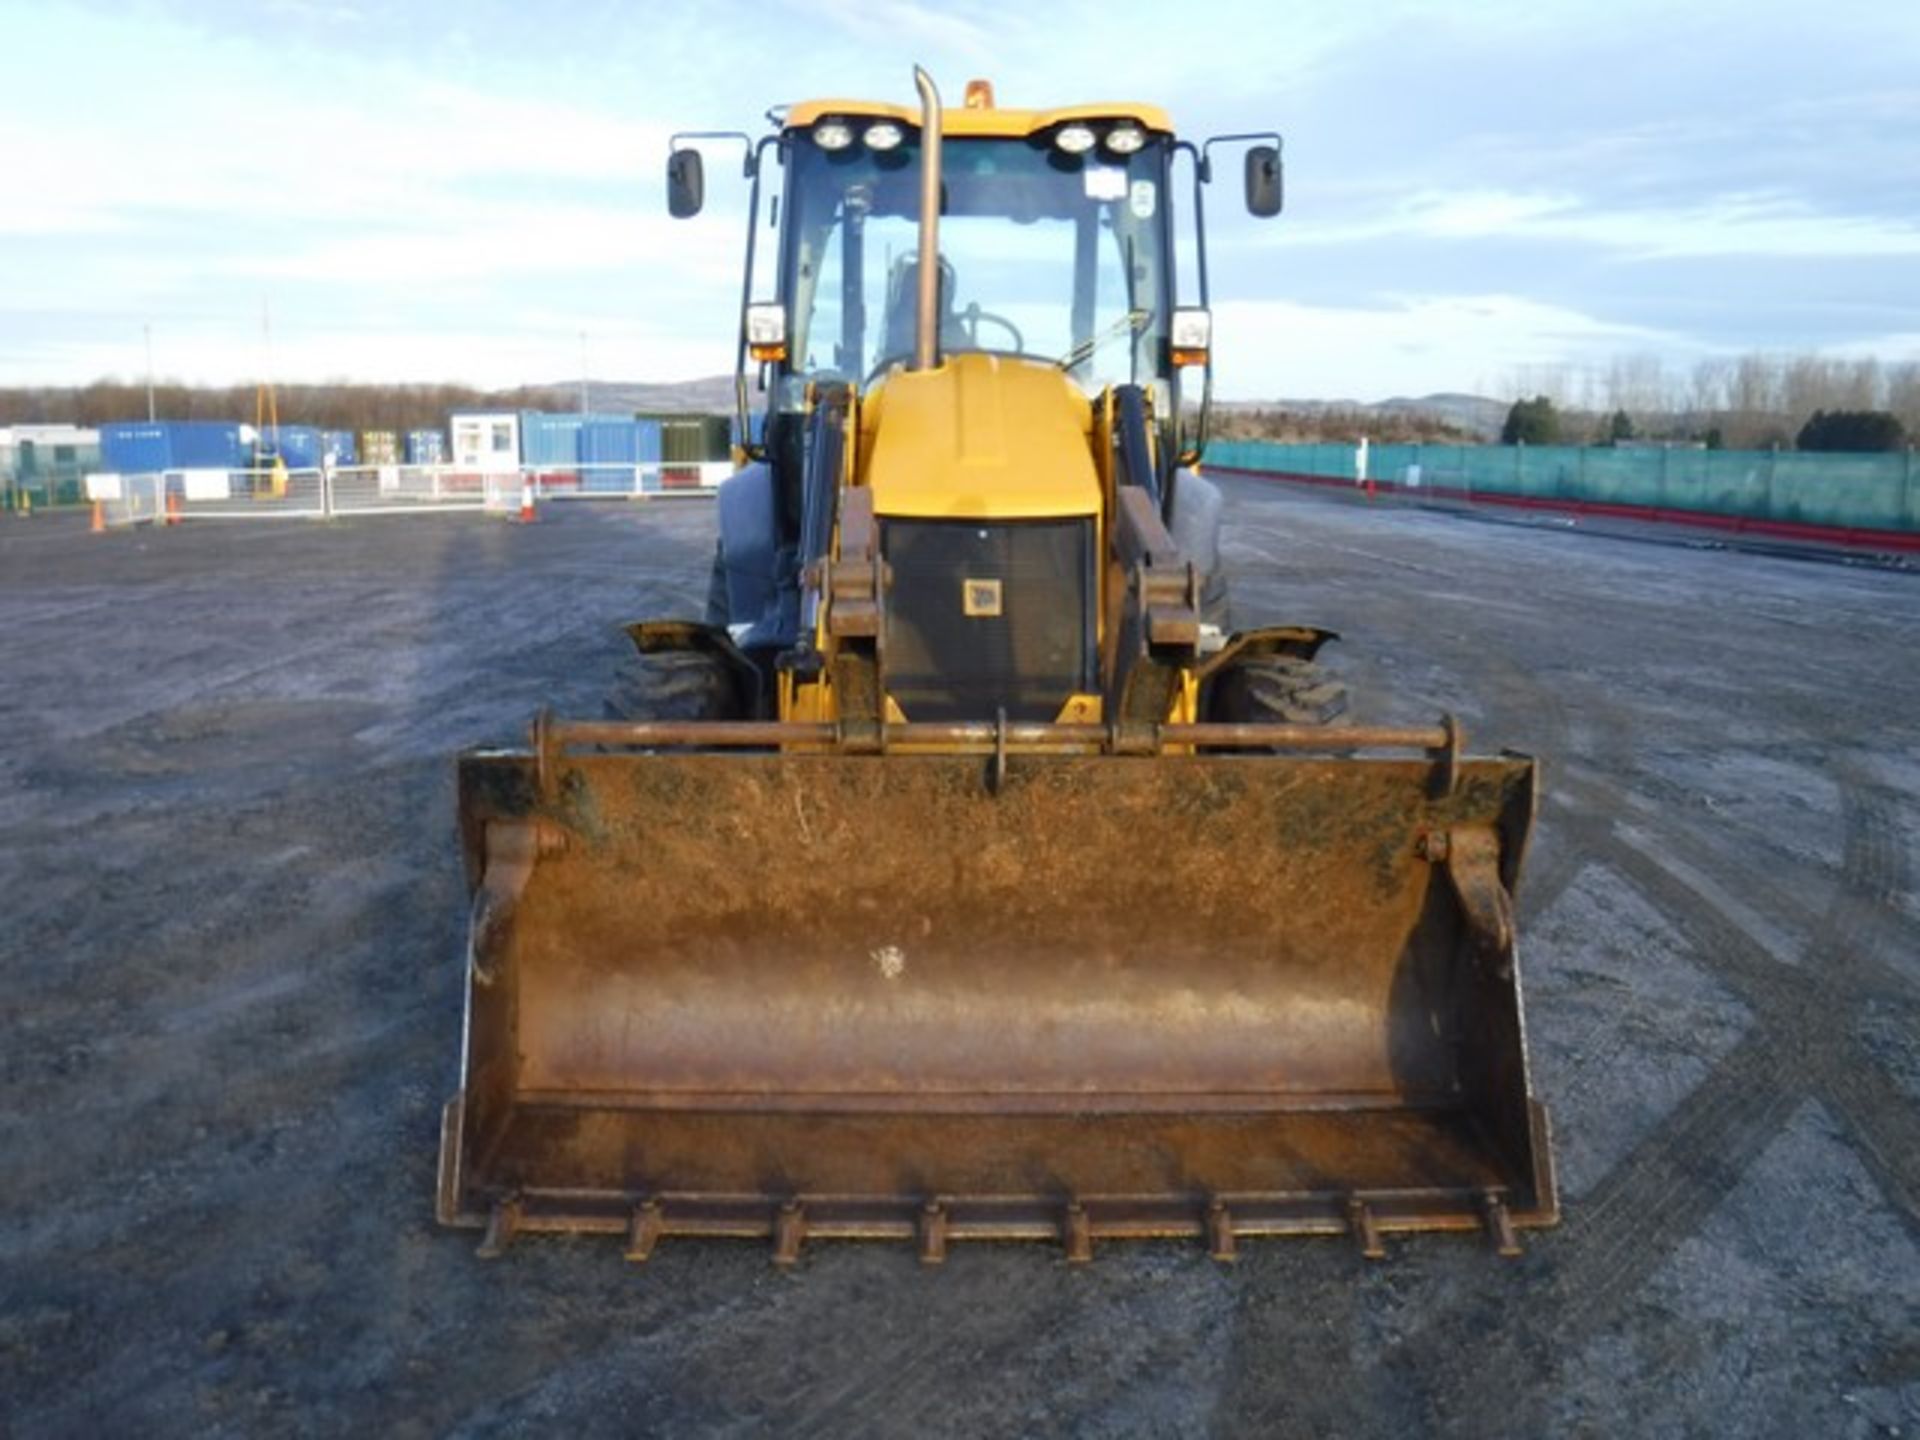 2011 JCB 3CX ECO 4 in 1 bucket S/N JCB3CX4TP02008318 - 6175 hrs (not verified) - Image 2 of 14